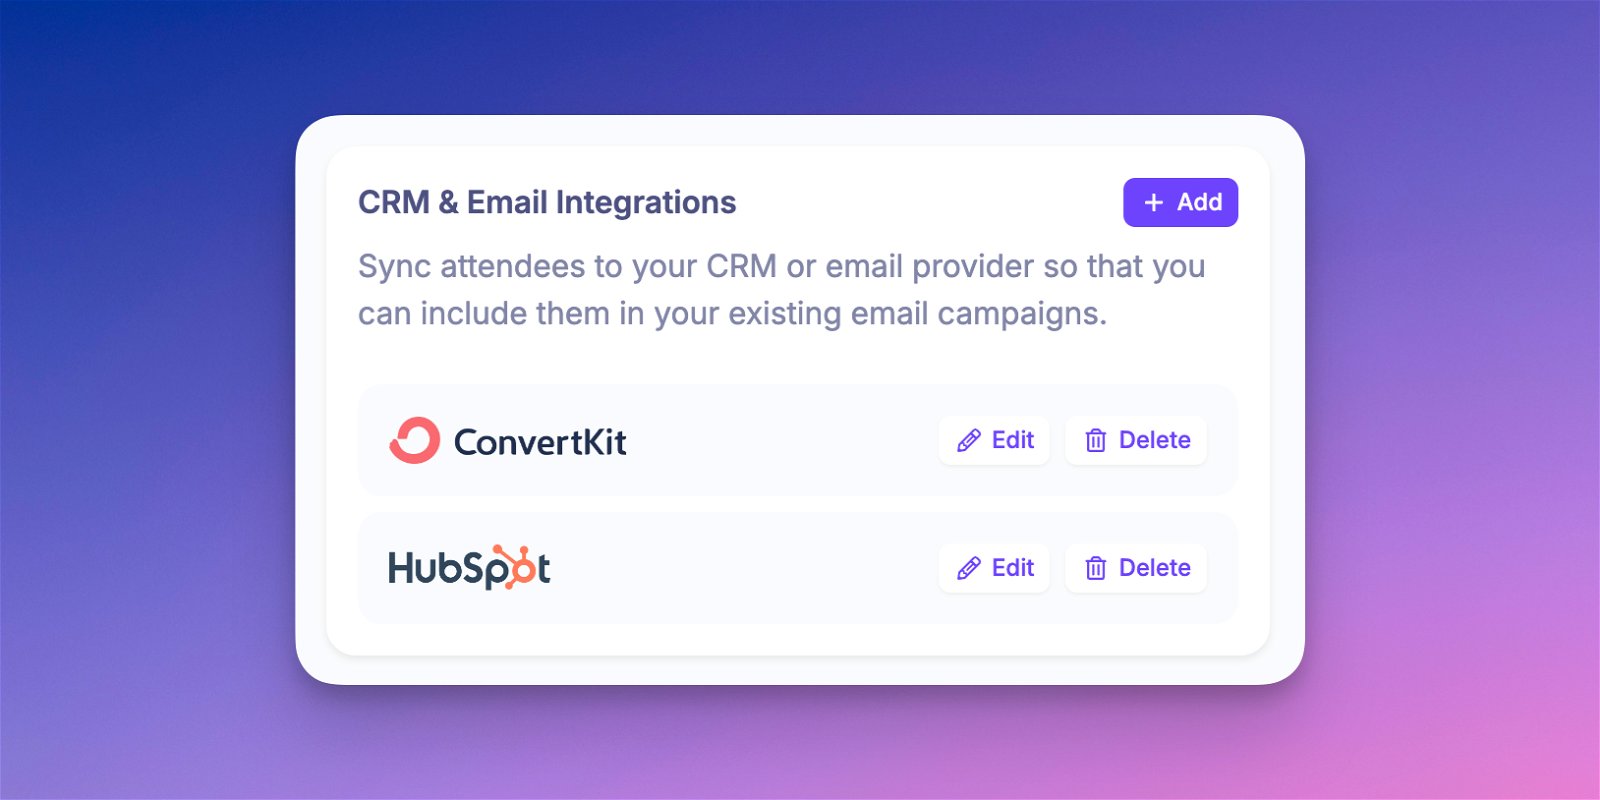 CRM & Email